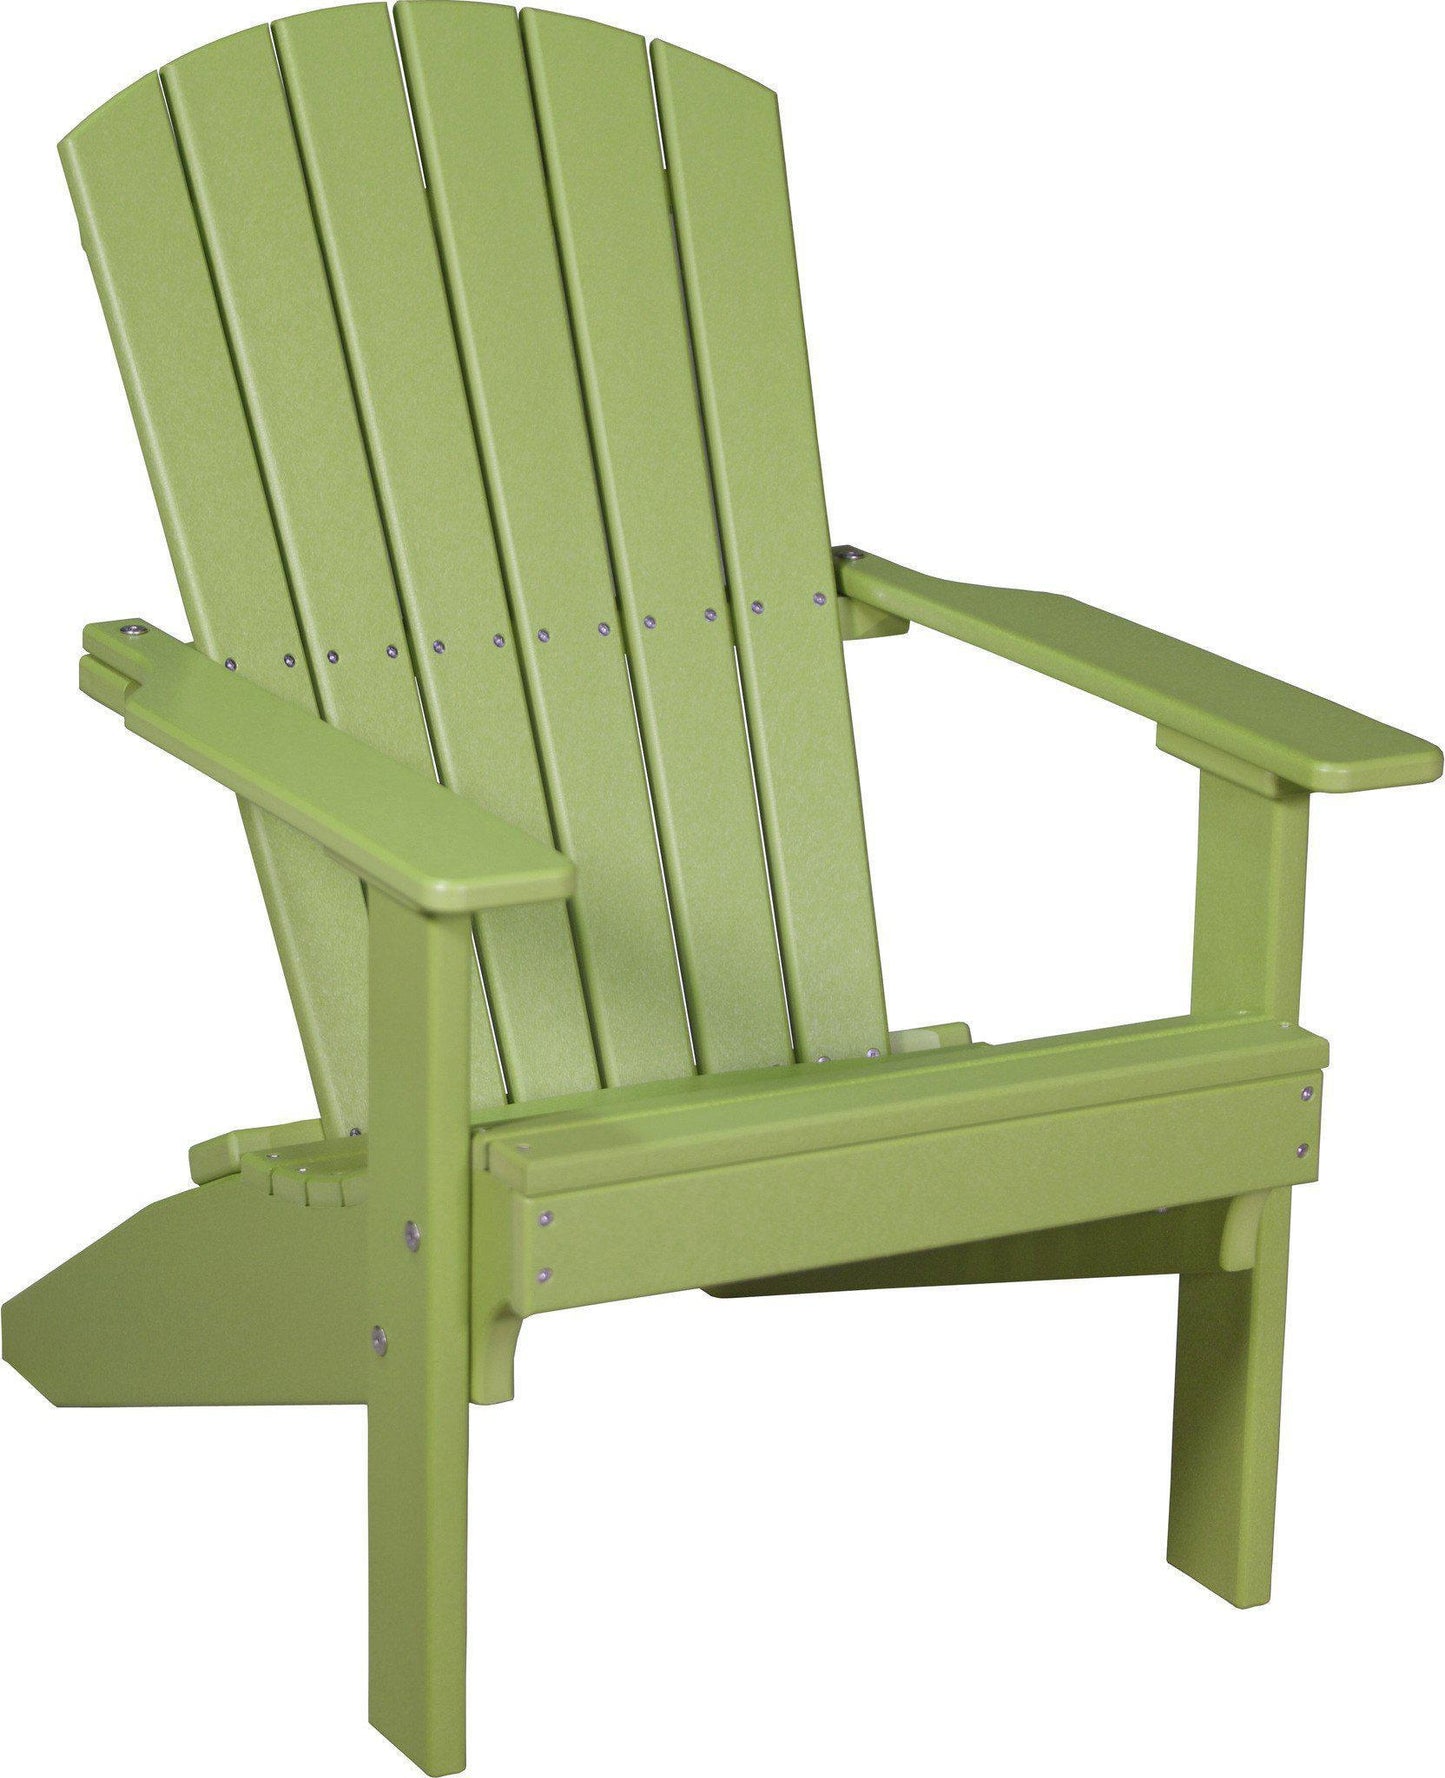 LuxCraft Recycled Plastic Lakeside Adirondack Chair - Rocking Furniture